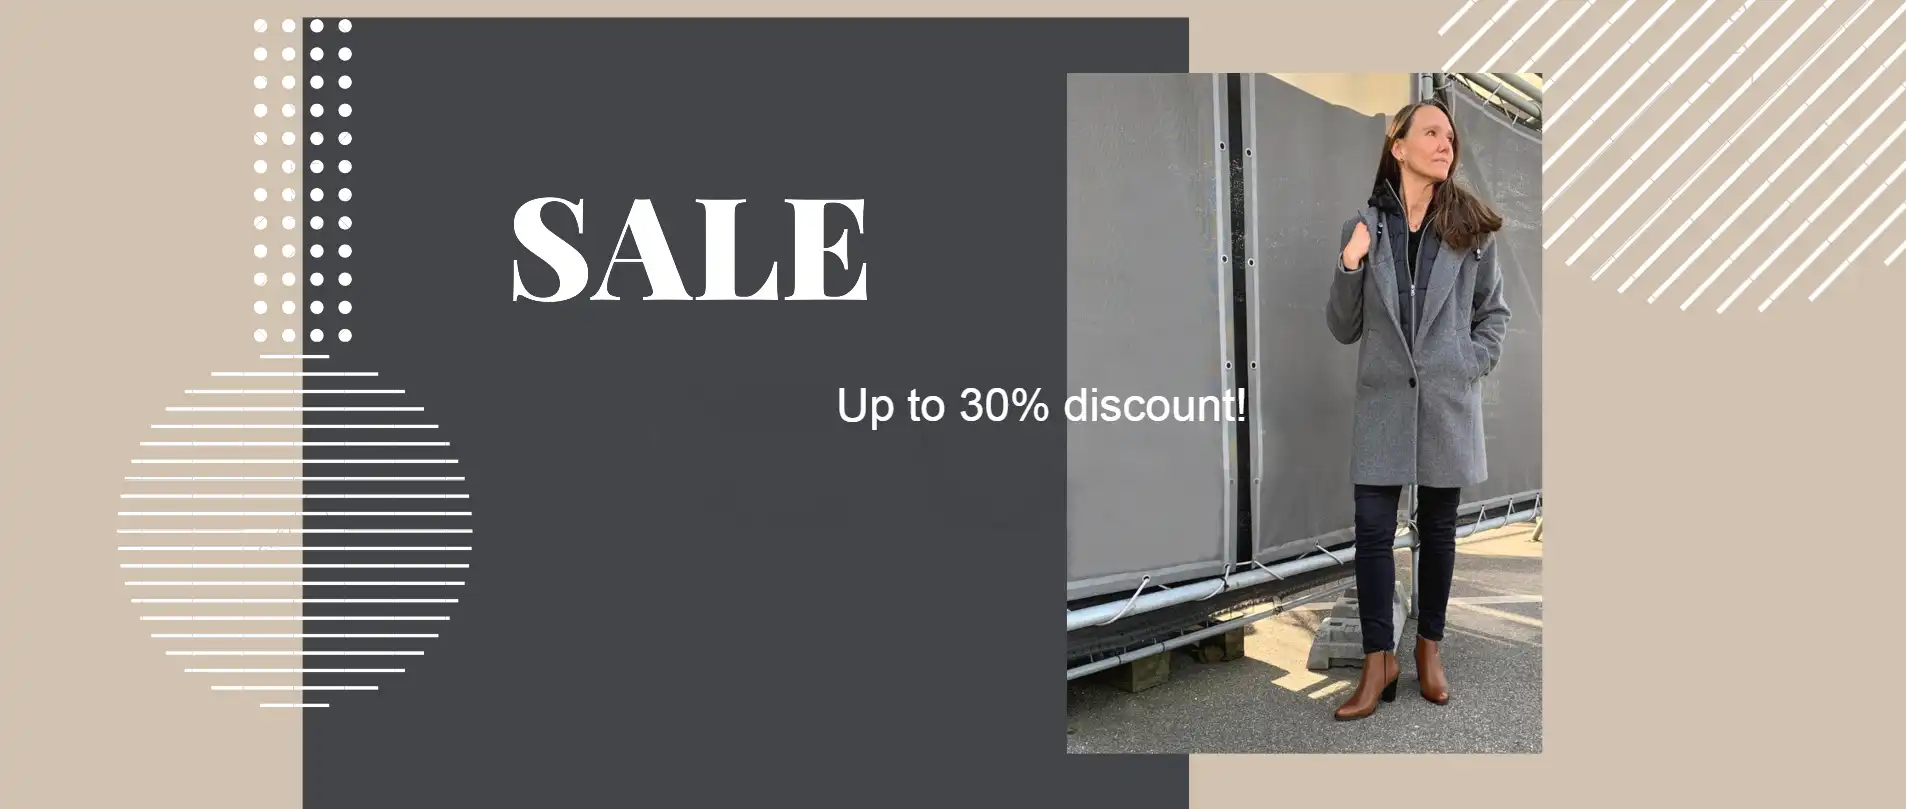 Sale ladies shoes - Up to 30% discount